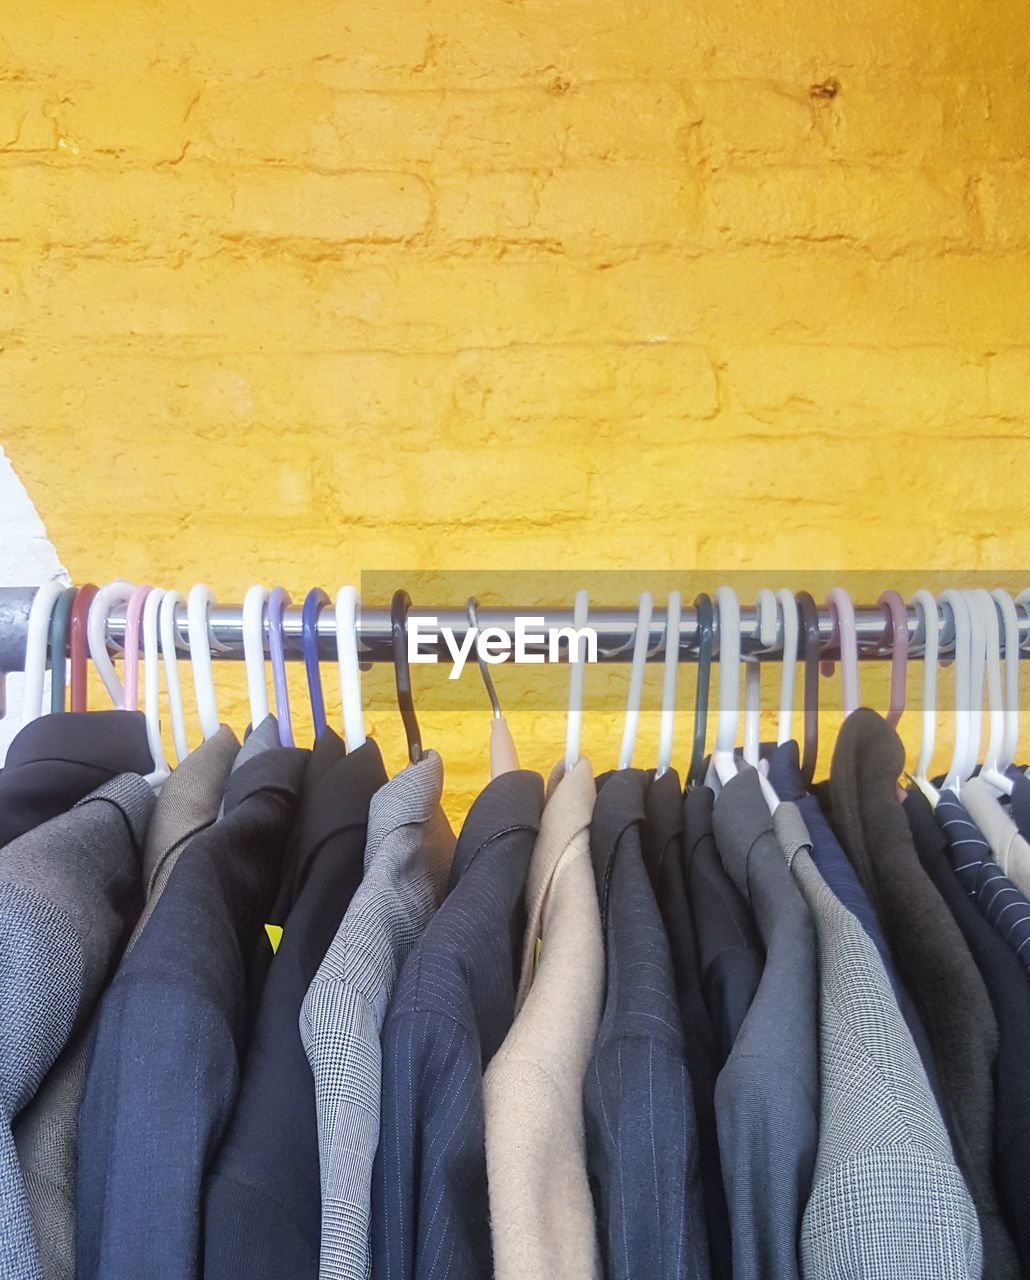 CLOSE-UP OF CLOTHES HANGING ON YELLOW PAPER